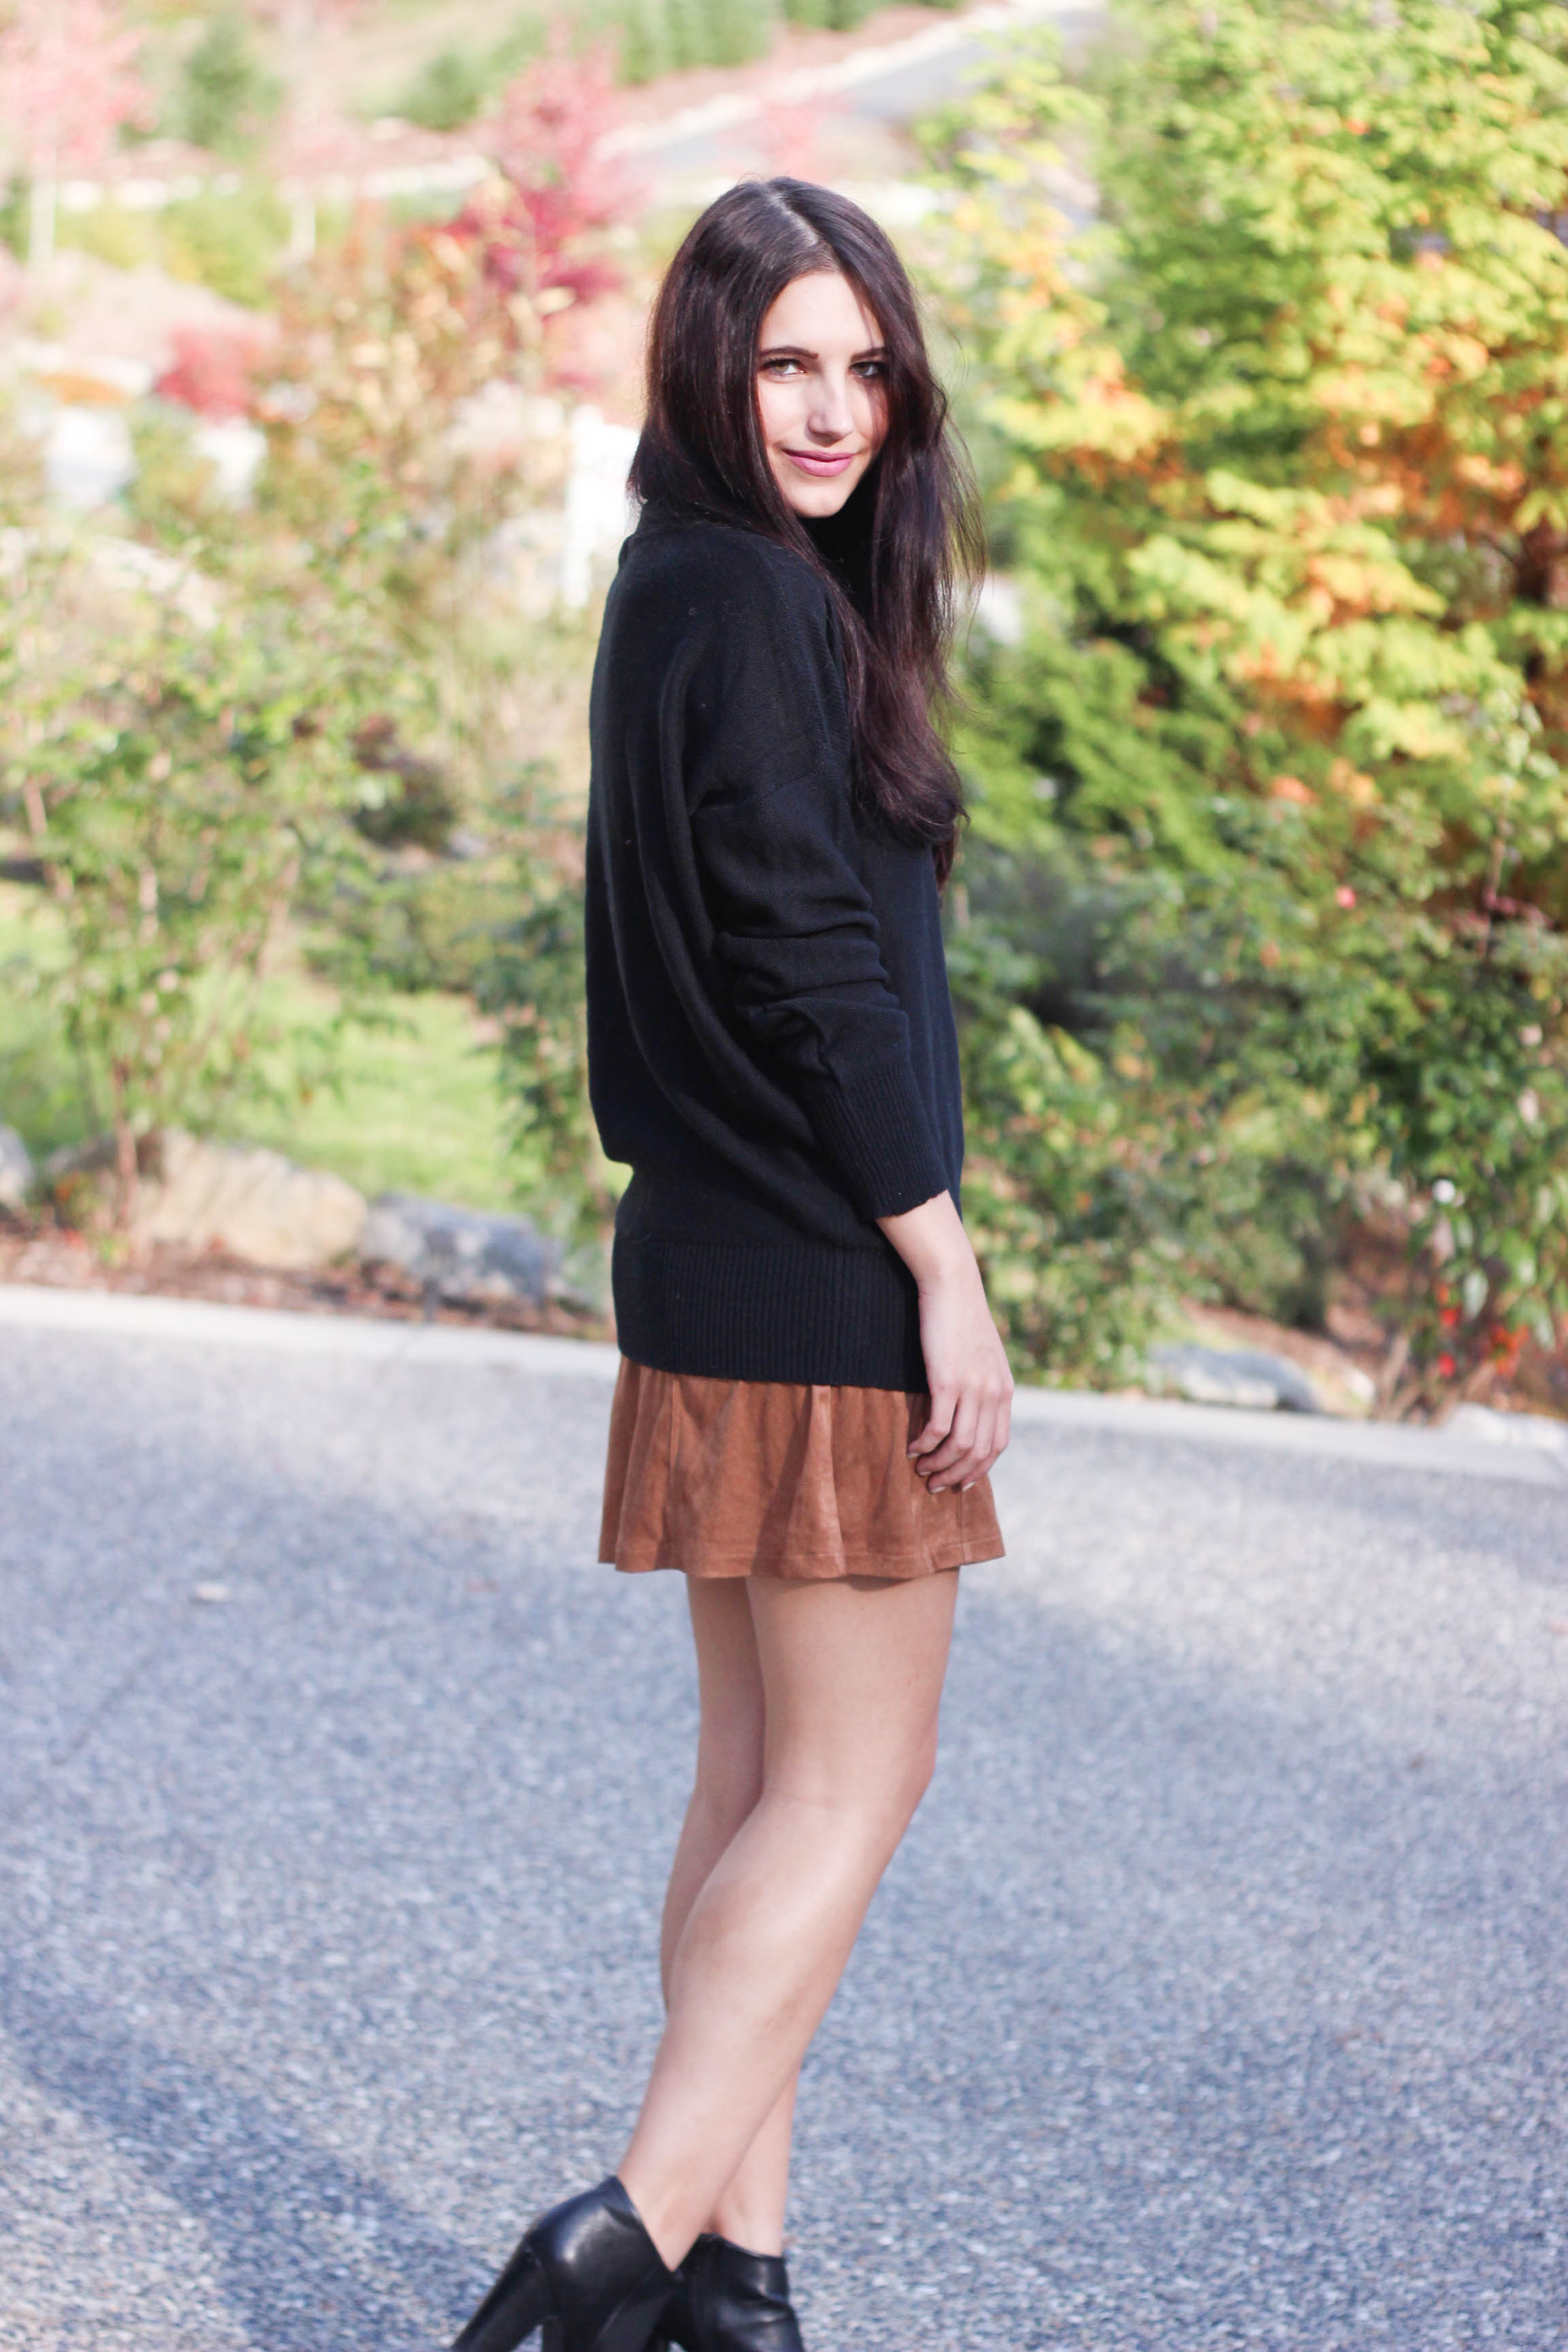 How to Transition a Suede Skirt into the Cooler Season